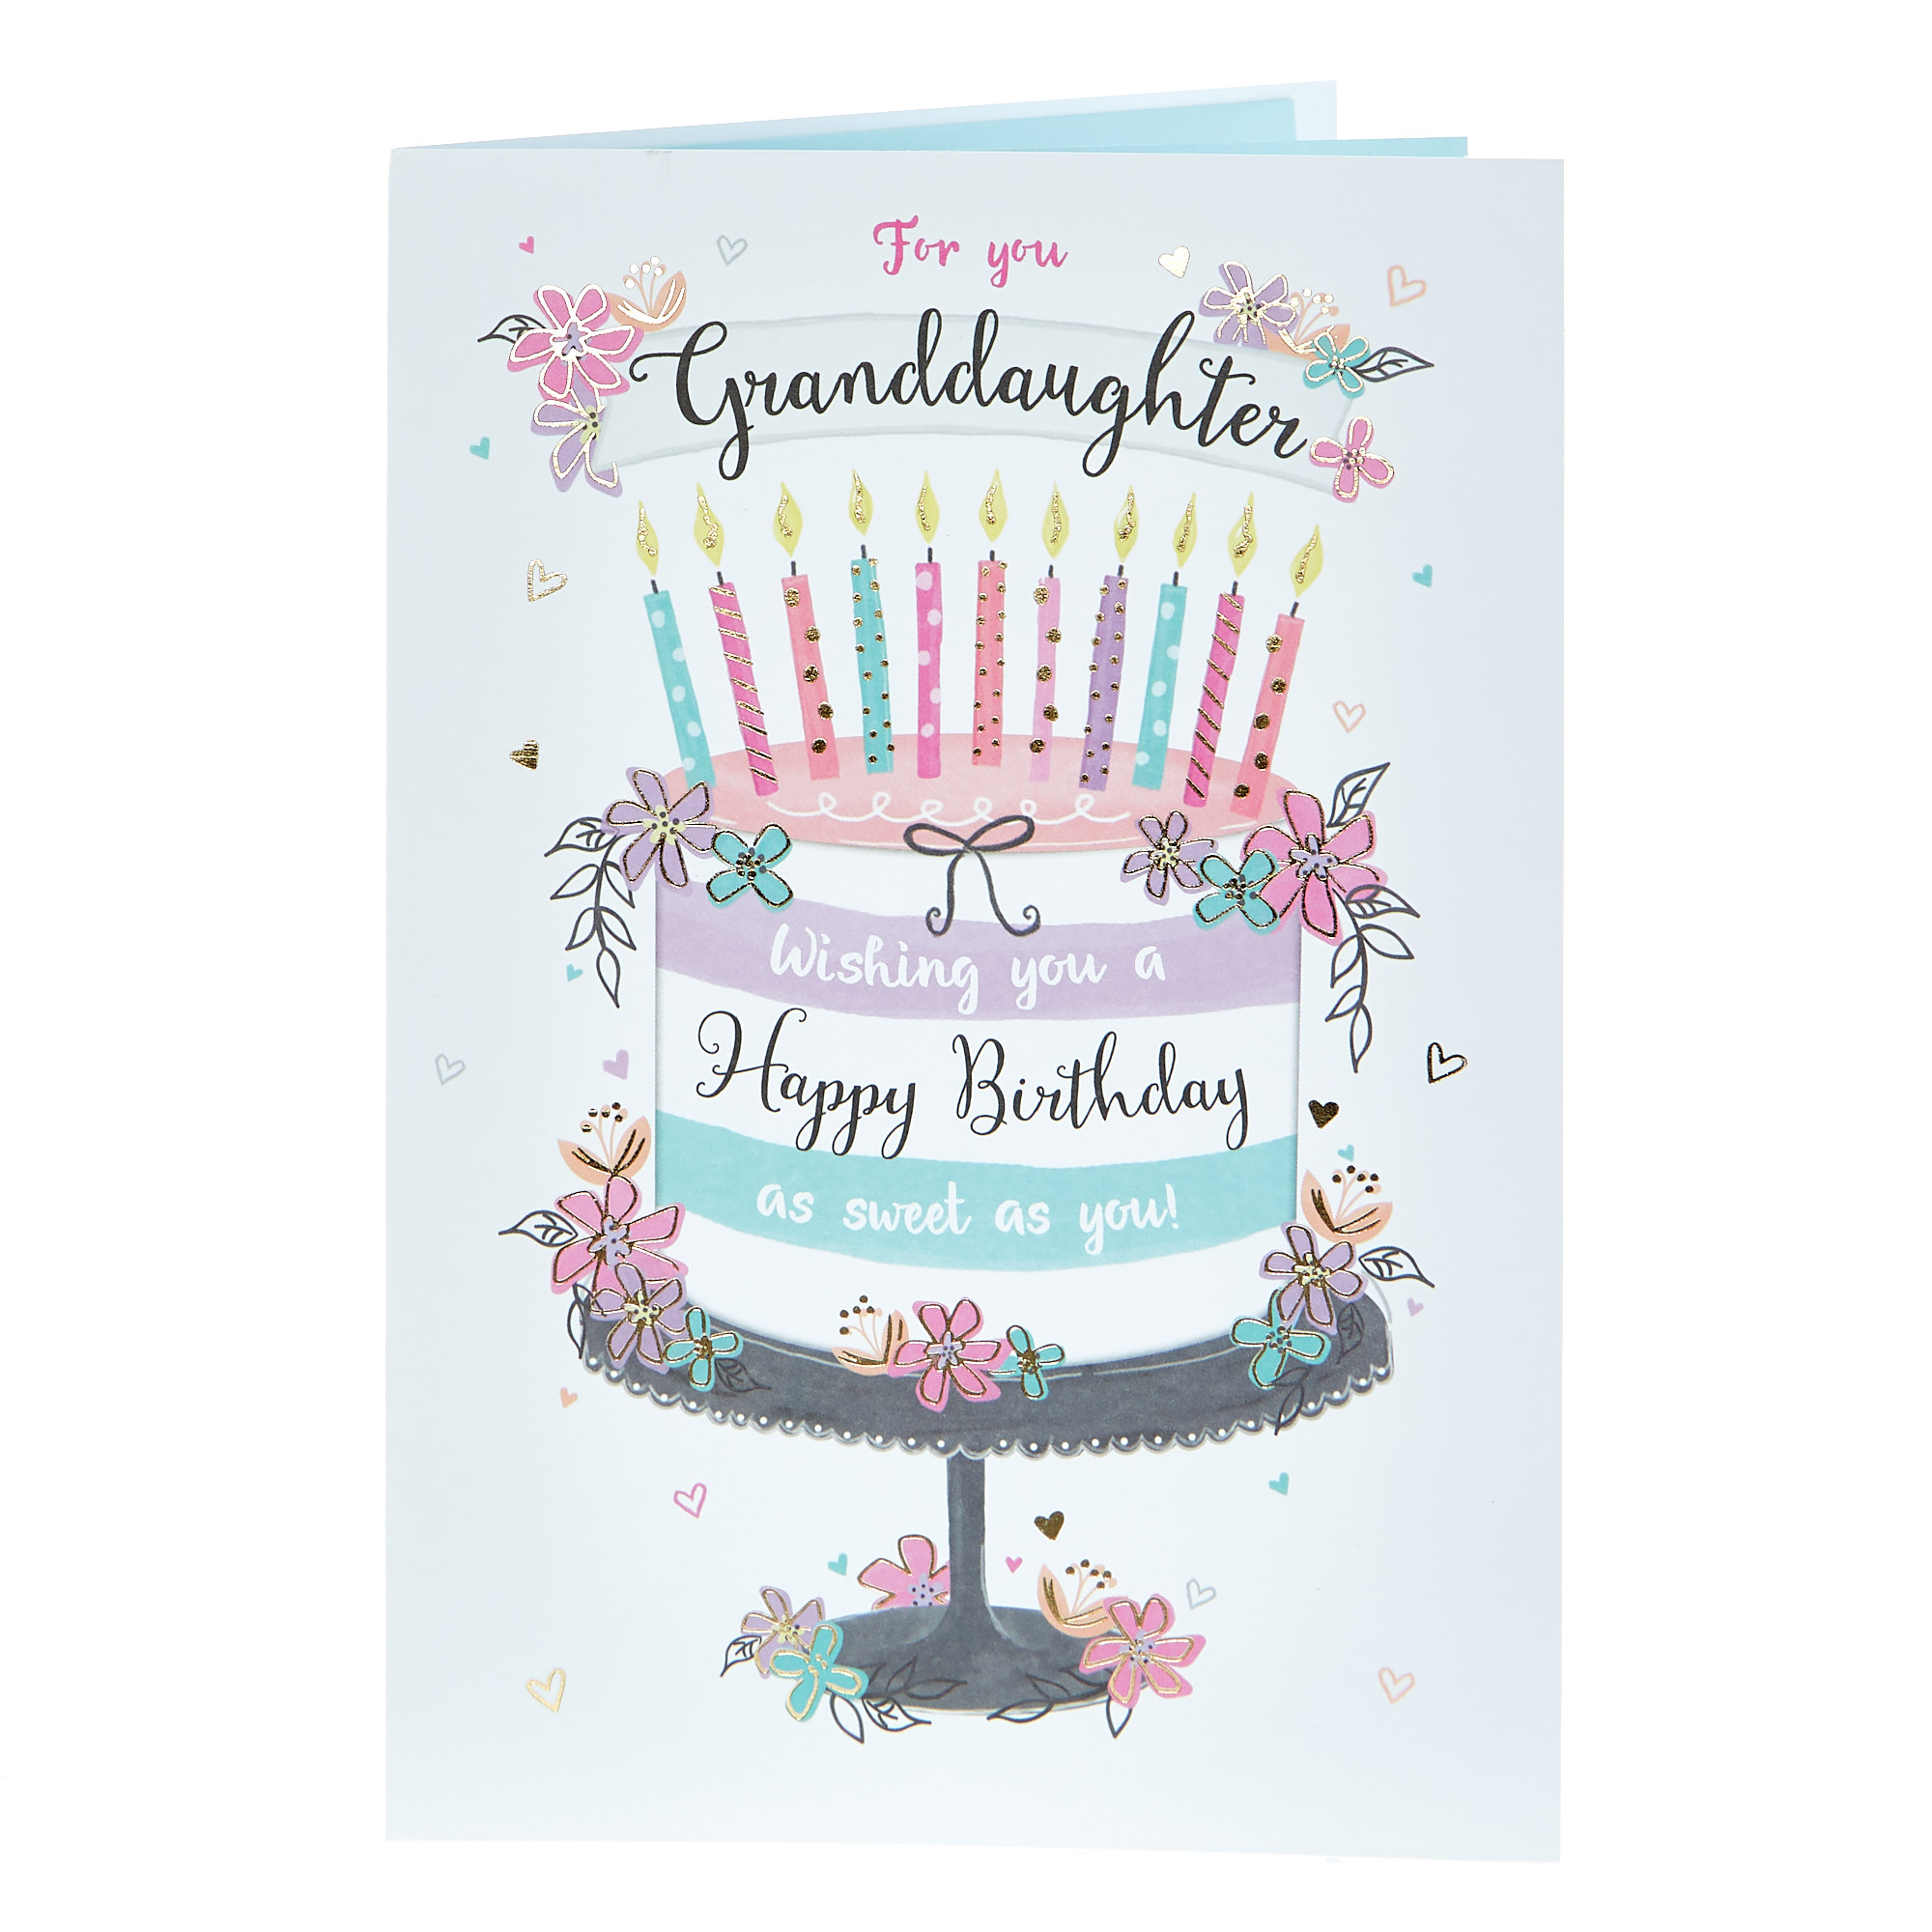 Buy Birthday Card - Granddaughter As Sweet As You for GBP 0.99 | Card  Factory UK